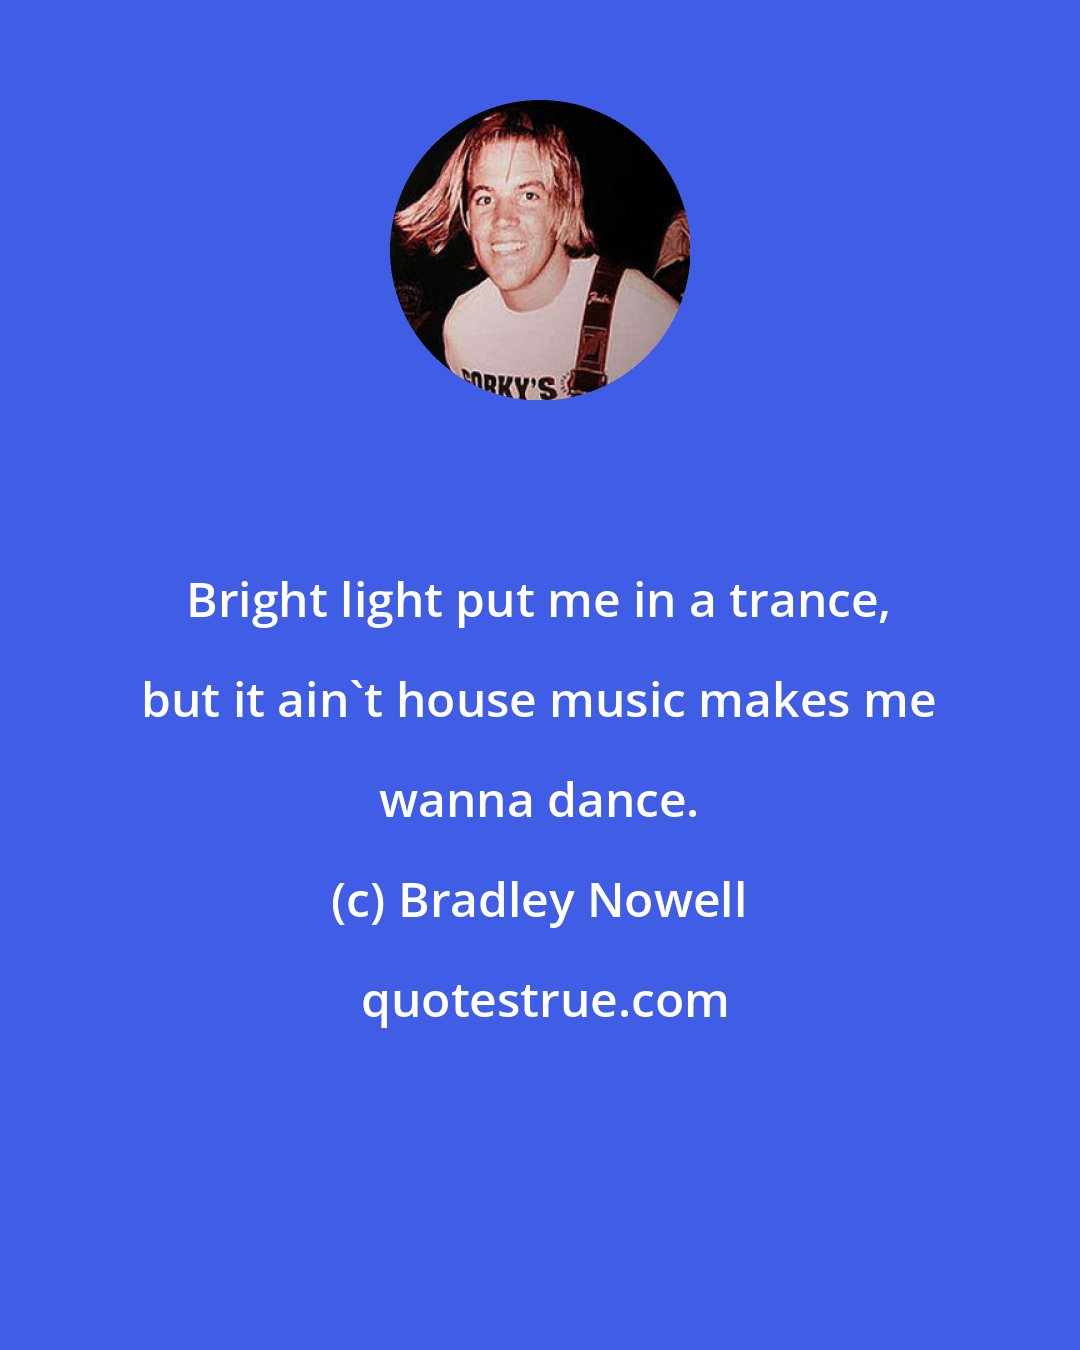 Bradley Nowell: Bright light put me in a trance, but it ain't house music makes me wanna dance.